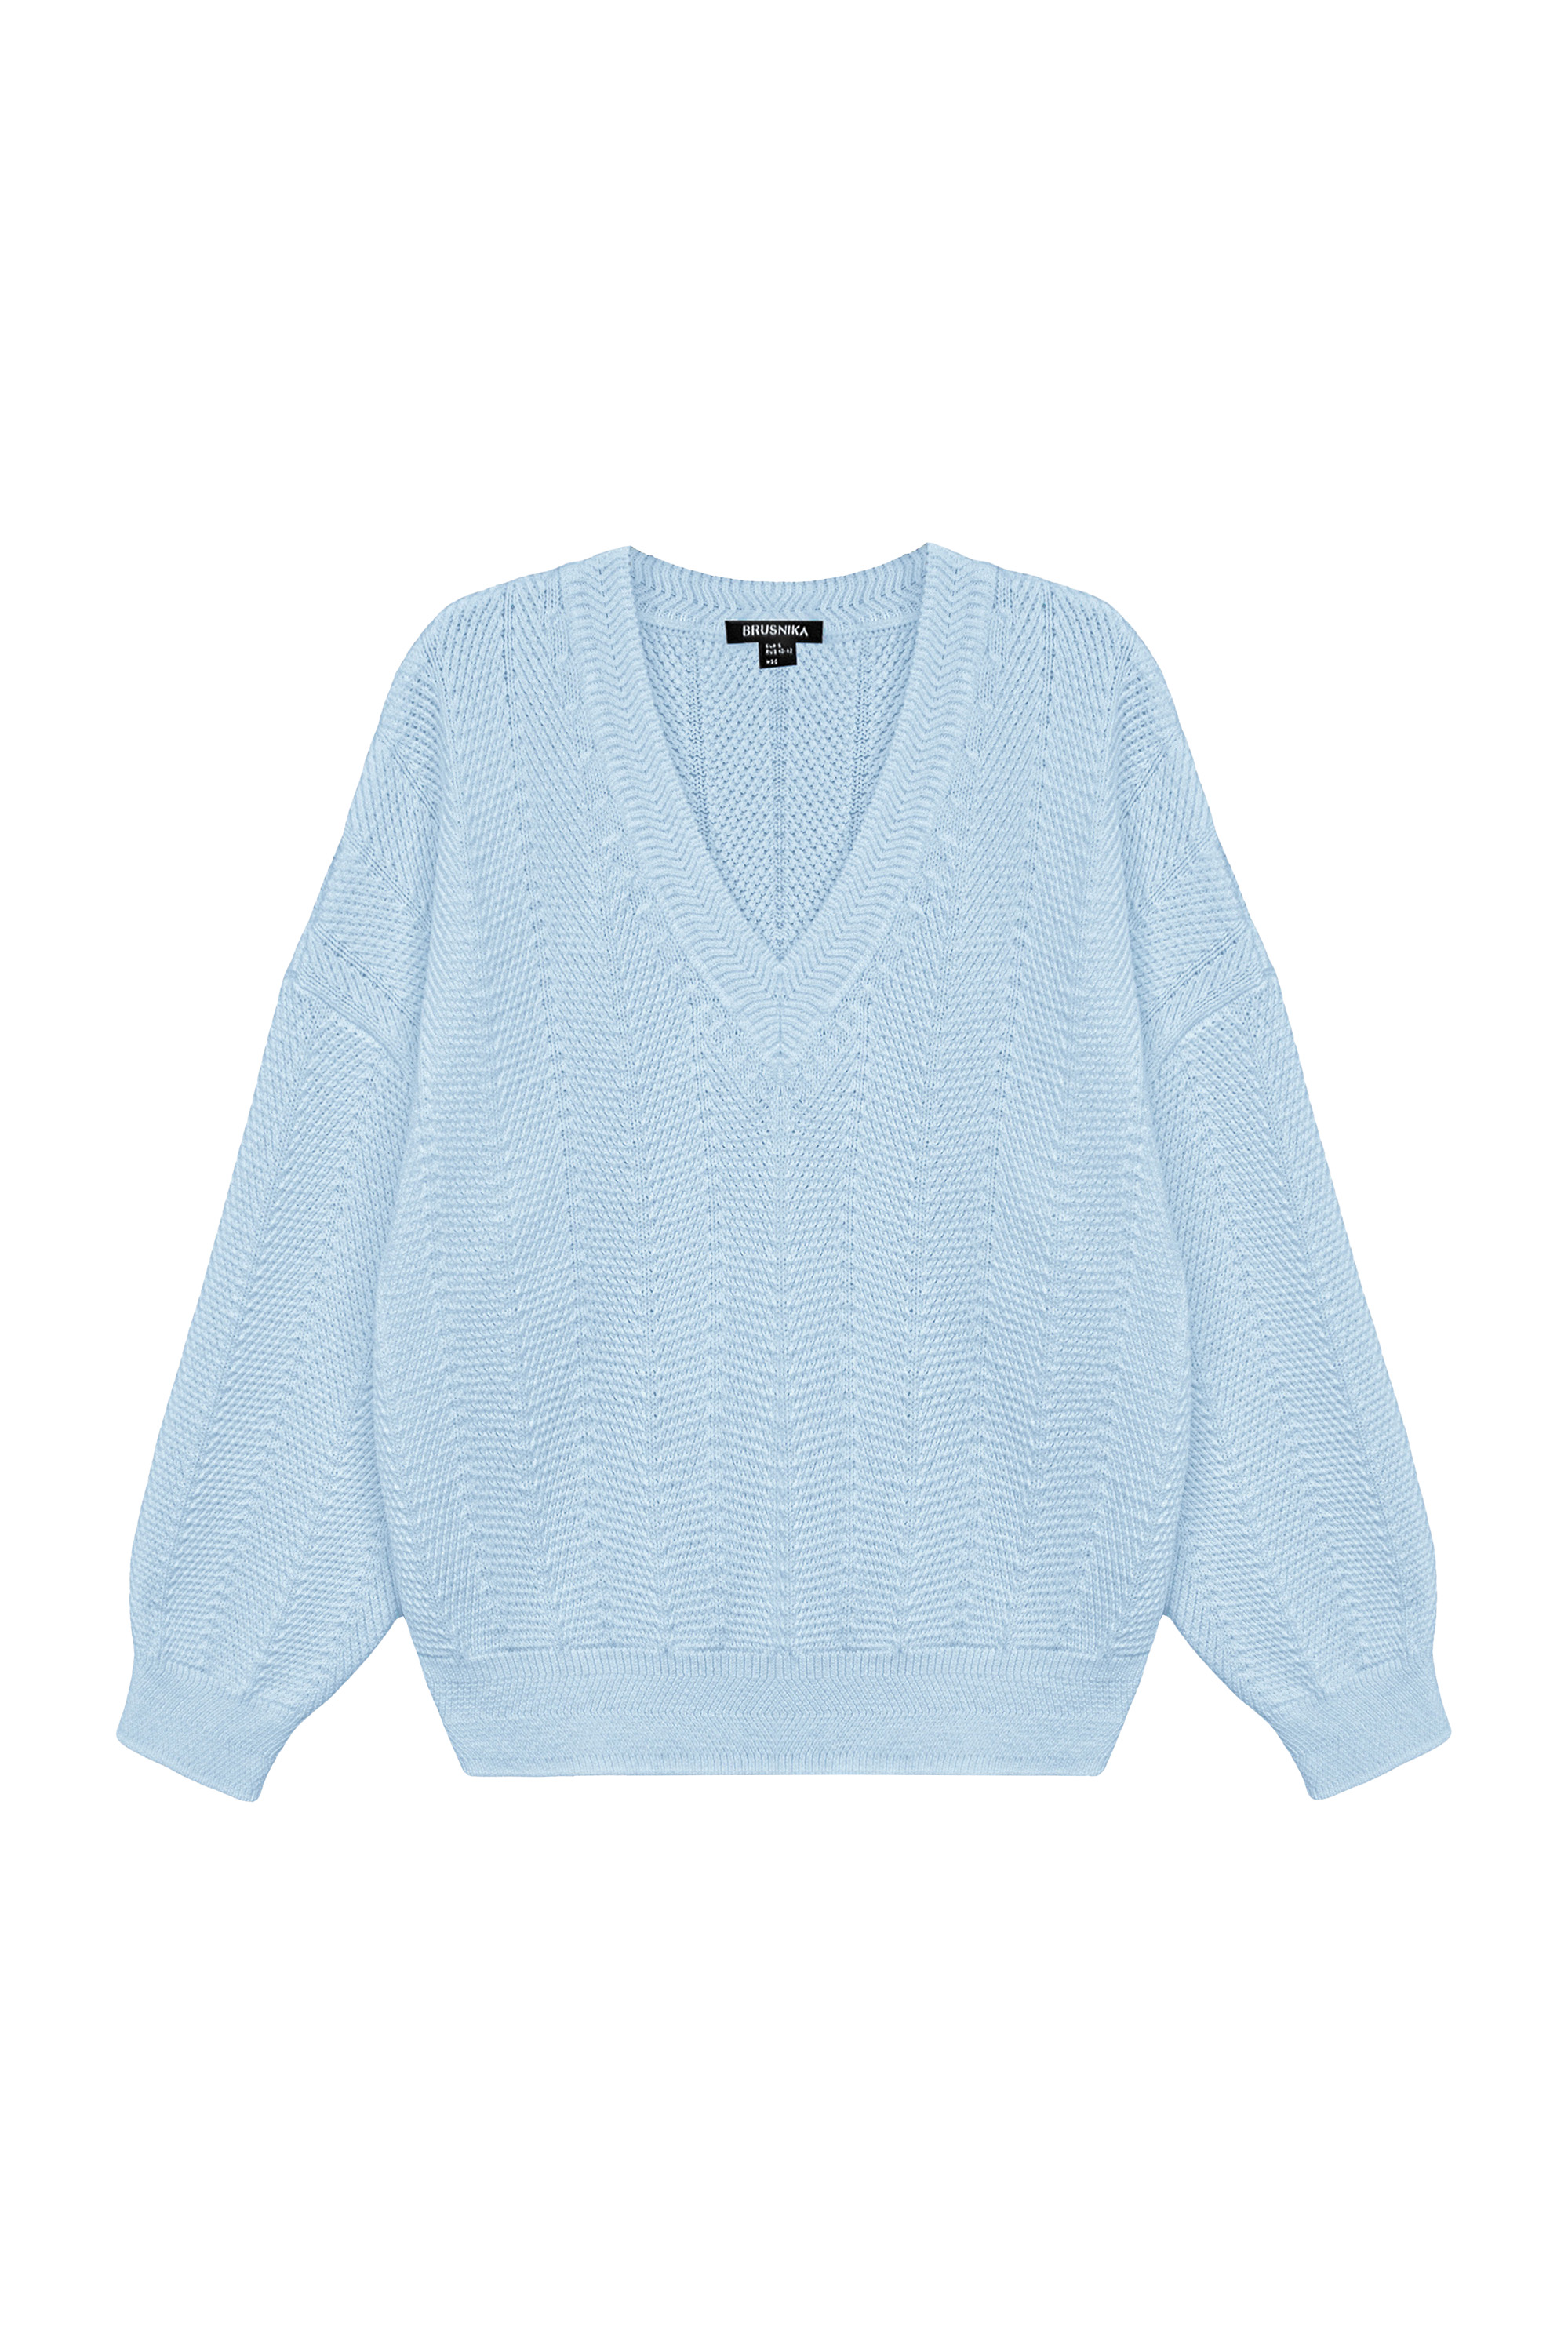 Pull-over 3967-07 Blue from BRUSNiKA